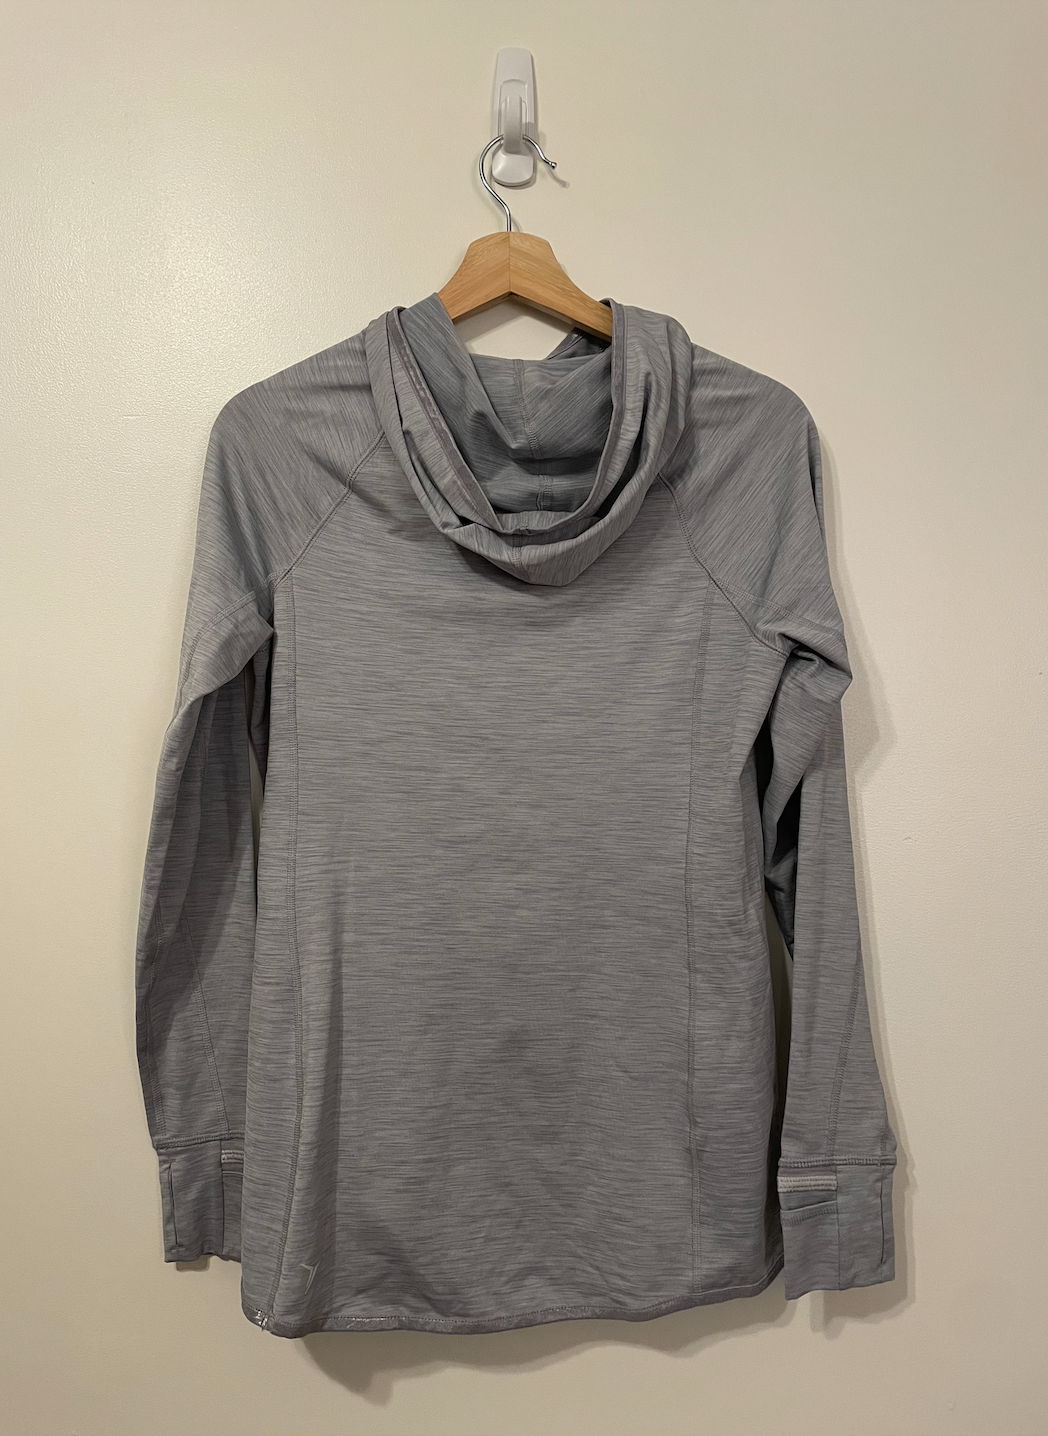 Go Dry Old Navy long sleeve workout shirt - size small - women's outdoor running top - hooded grey athletic shirt